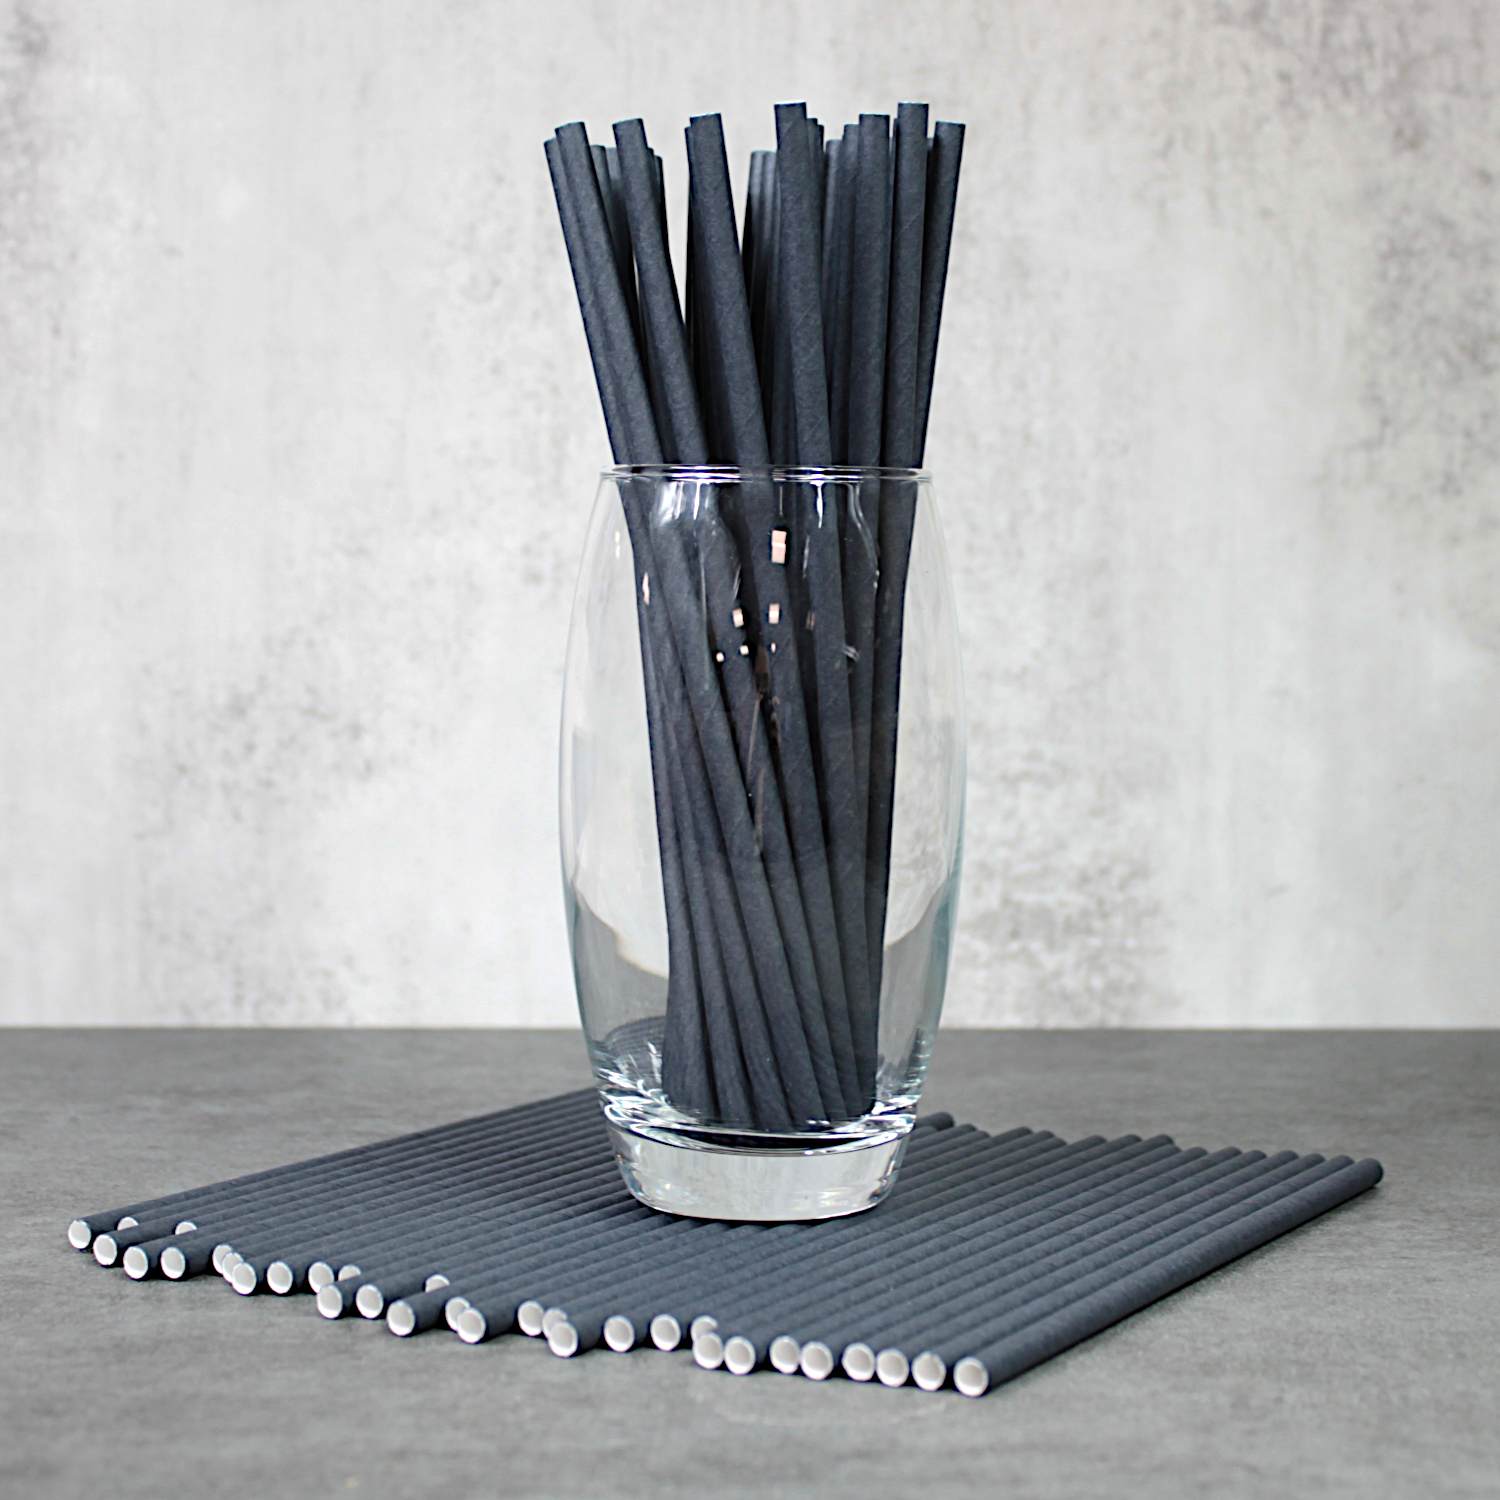 Our new stylish Midnight Black Paper Straws, positioned underneath a glass filled with other Midnight Black Paper Straws.